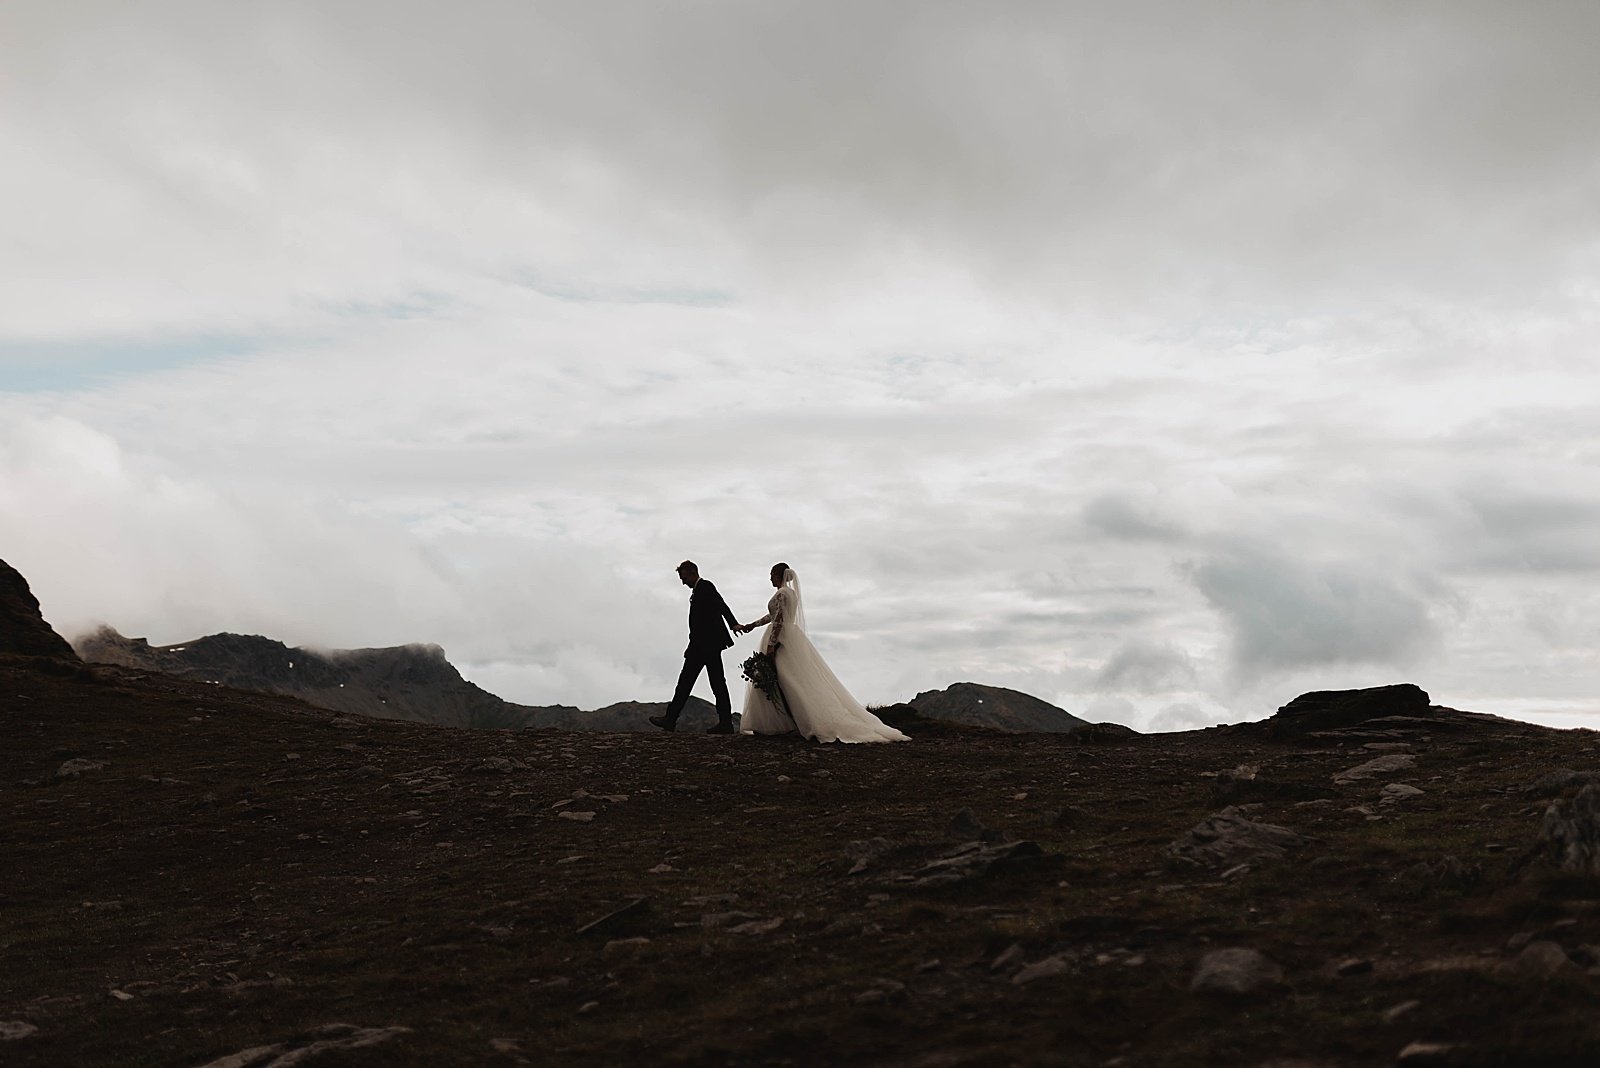  Newlyweds in wedding clothes walking along a ridge at Hatcher Pass.  